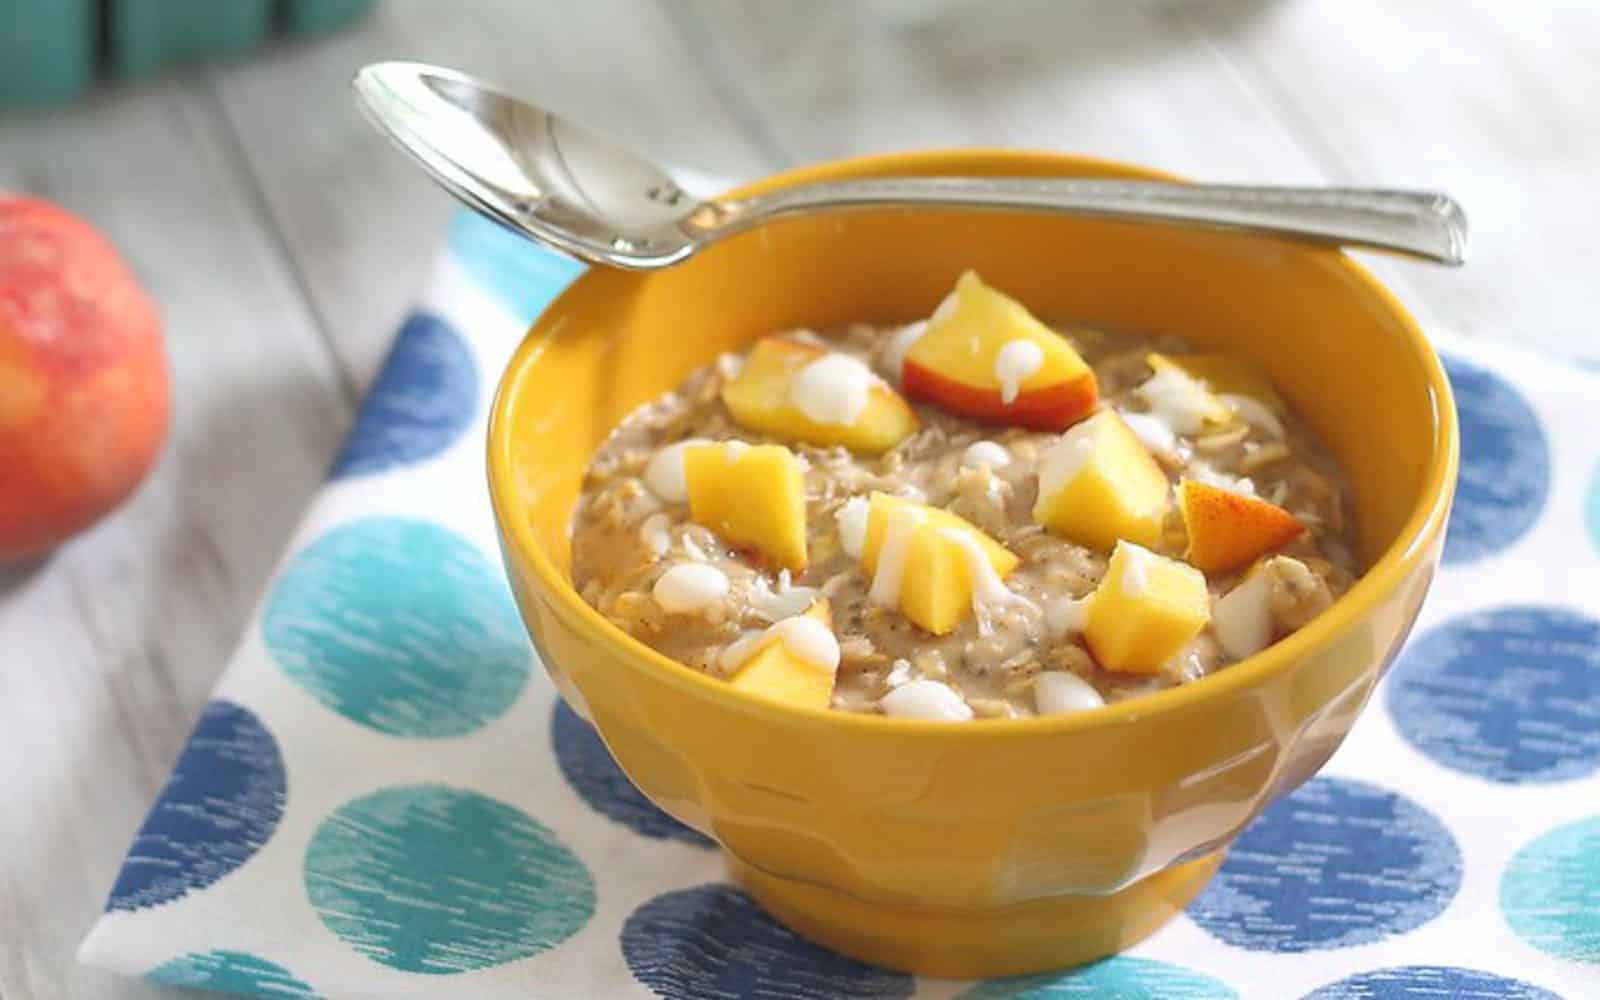 <p>Peaches and coconut cream oats offer a tropical twist on the classic peaches and cream combination. This oatmeal is a healthier yet flavorful option for your breakfast, providing a delightful blend of tastes. It’s a great choice for those seeking a refreshing and creamy morning meal.<br><strong>Get the Recipe: </strong><a href="https://www.runningtothekitchen.com/peaches-n-coconut-cream-oats/?utm_source=msn&utm_medium=page&utm_campaign=msn">Peaches and Cream Coconut Oats</a></p>